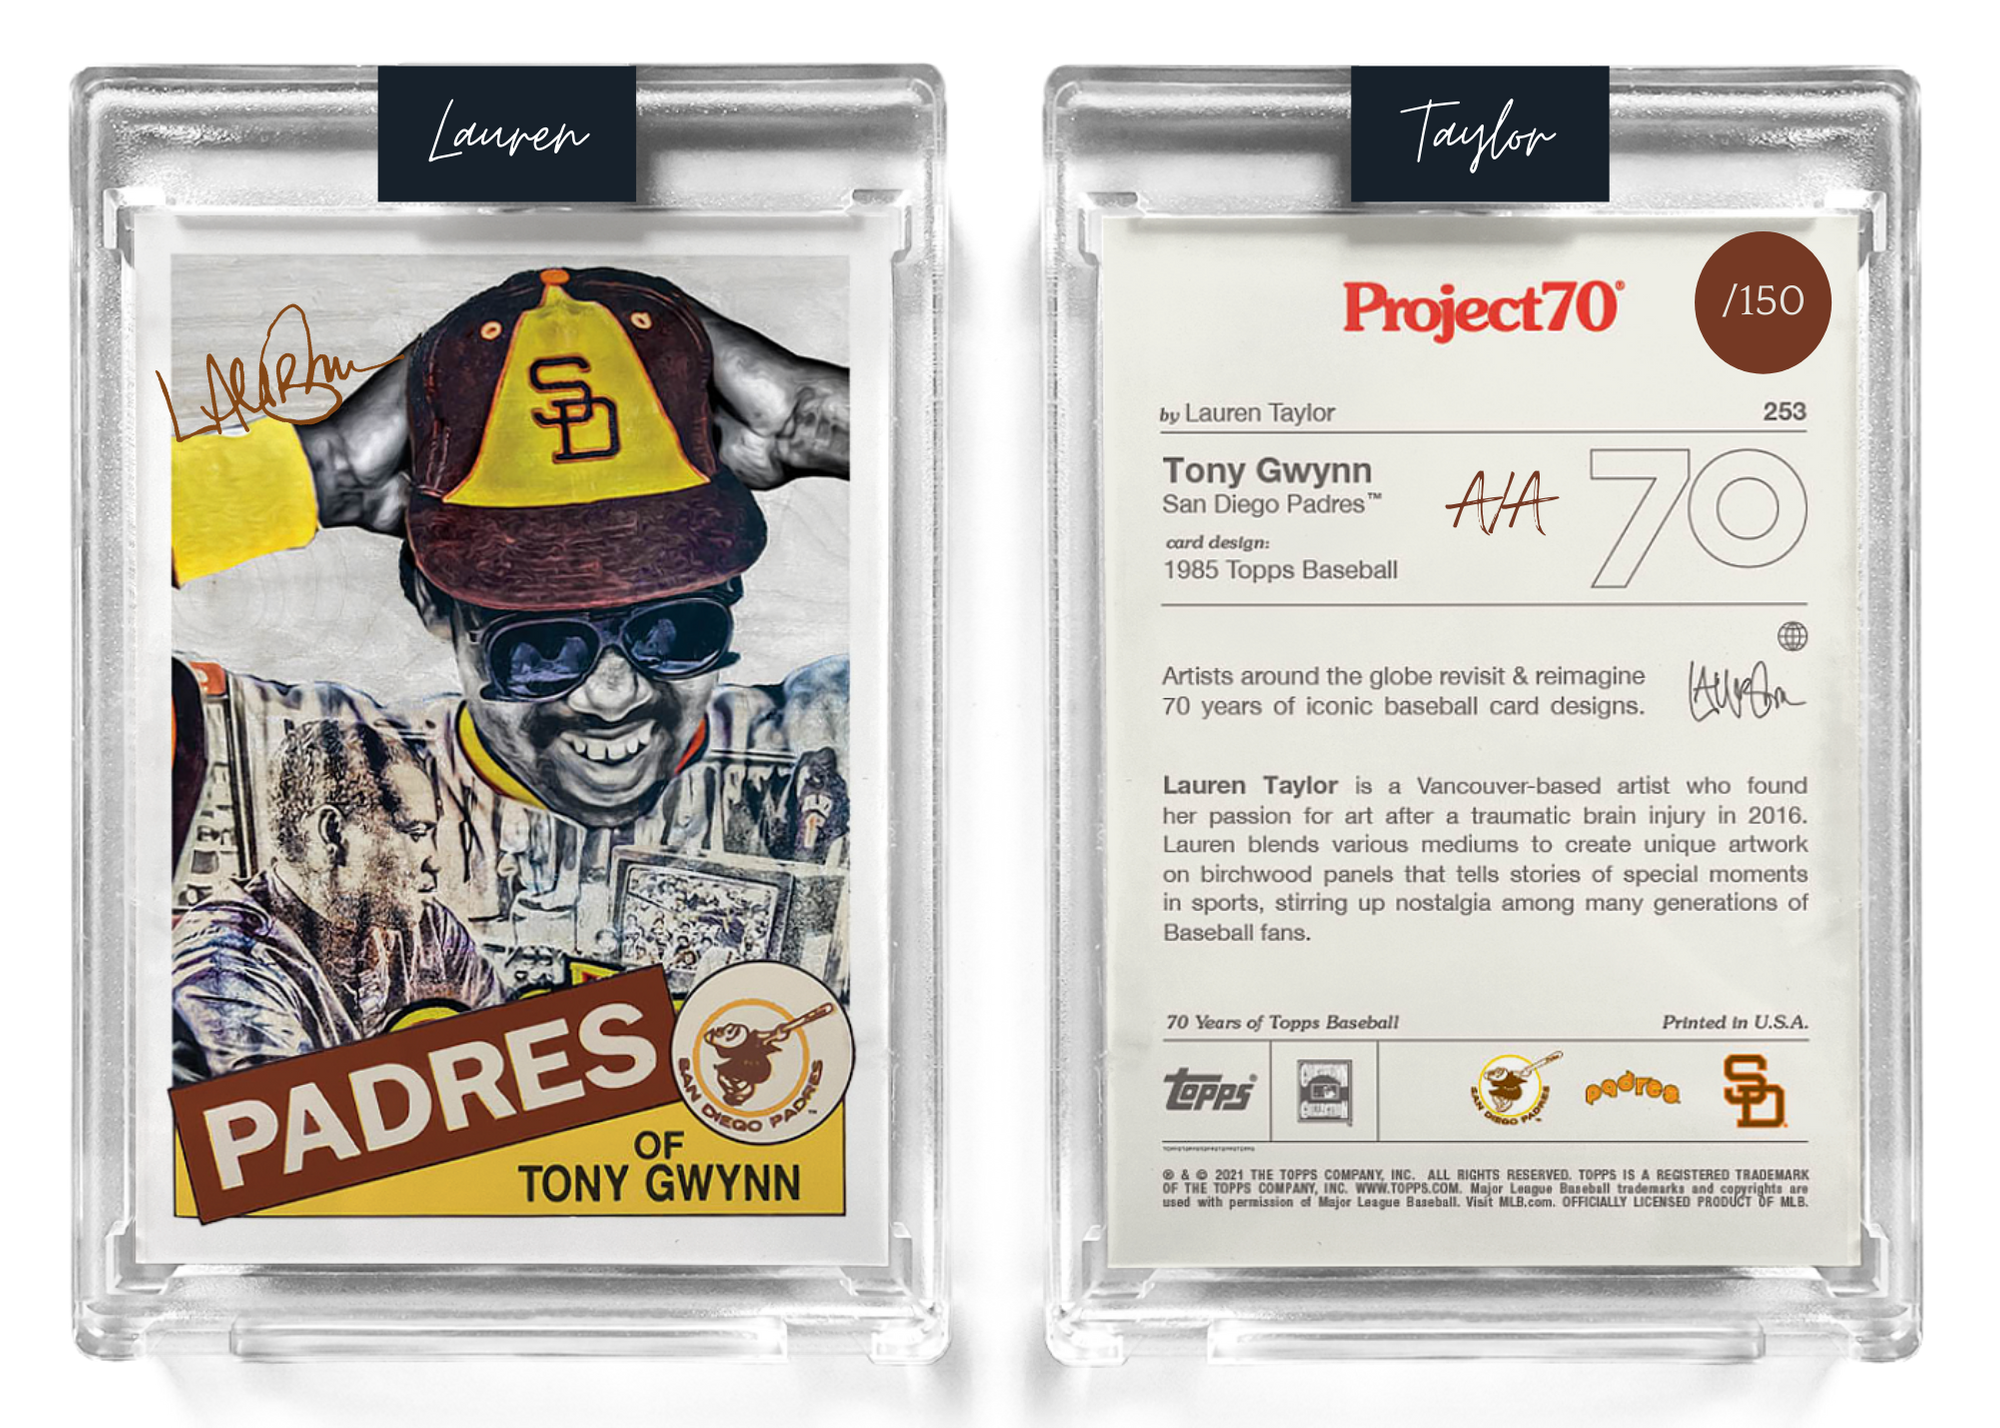 /150 Padre Brown Artist Signature - Topps Project 70 130pt card #253 by Lauren Taylor - Tony Gwynn